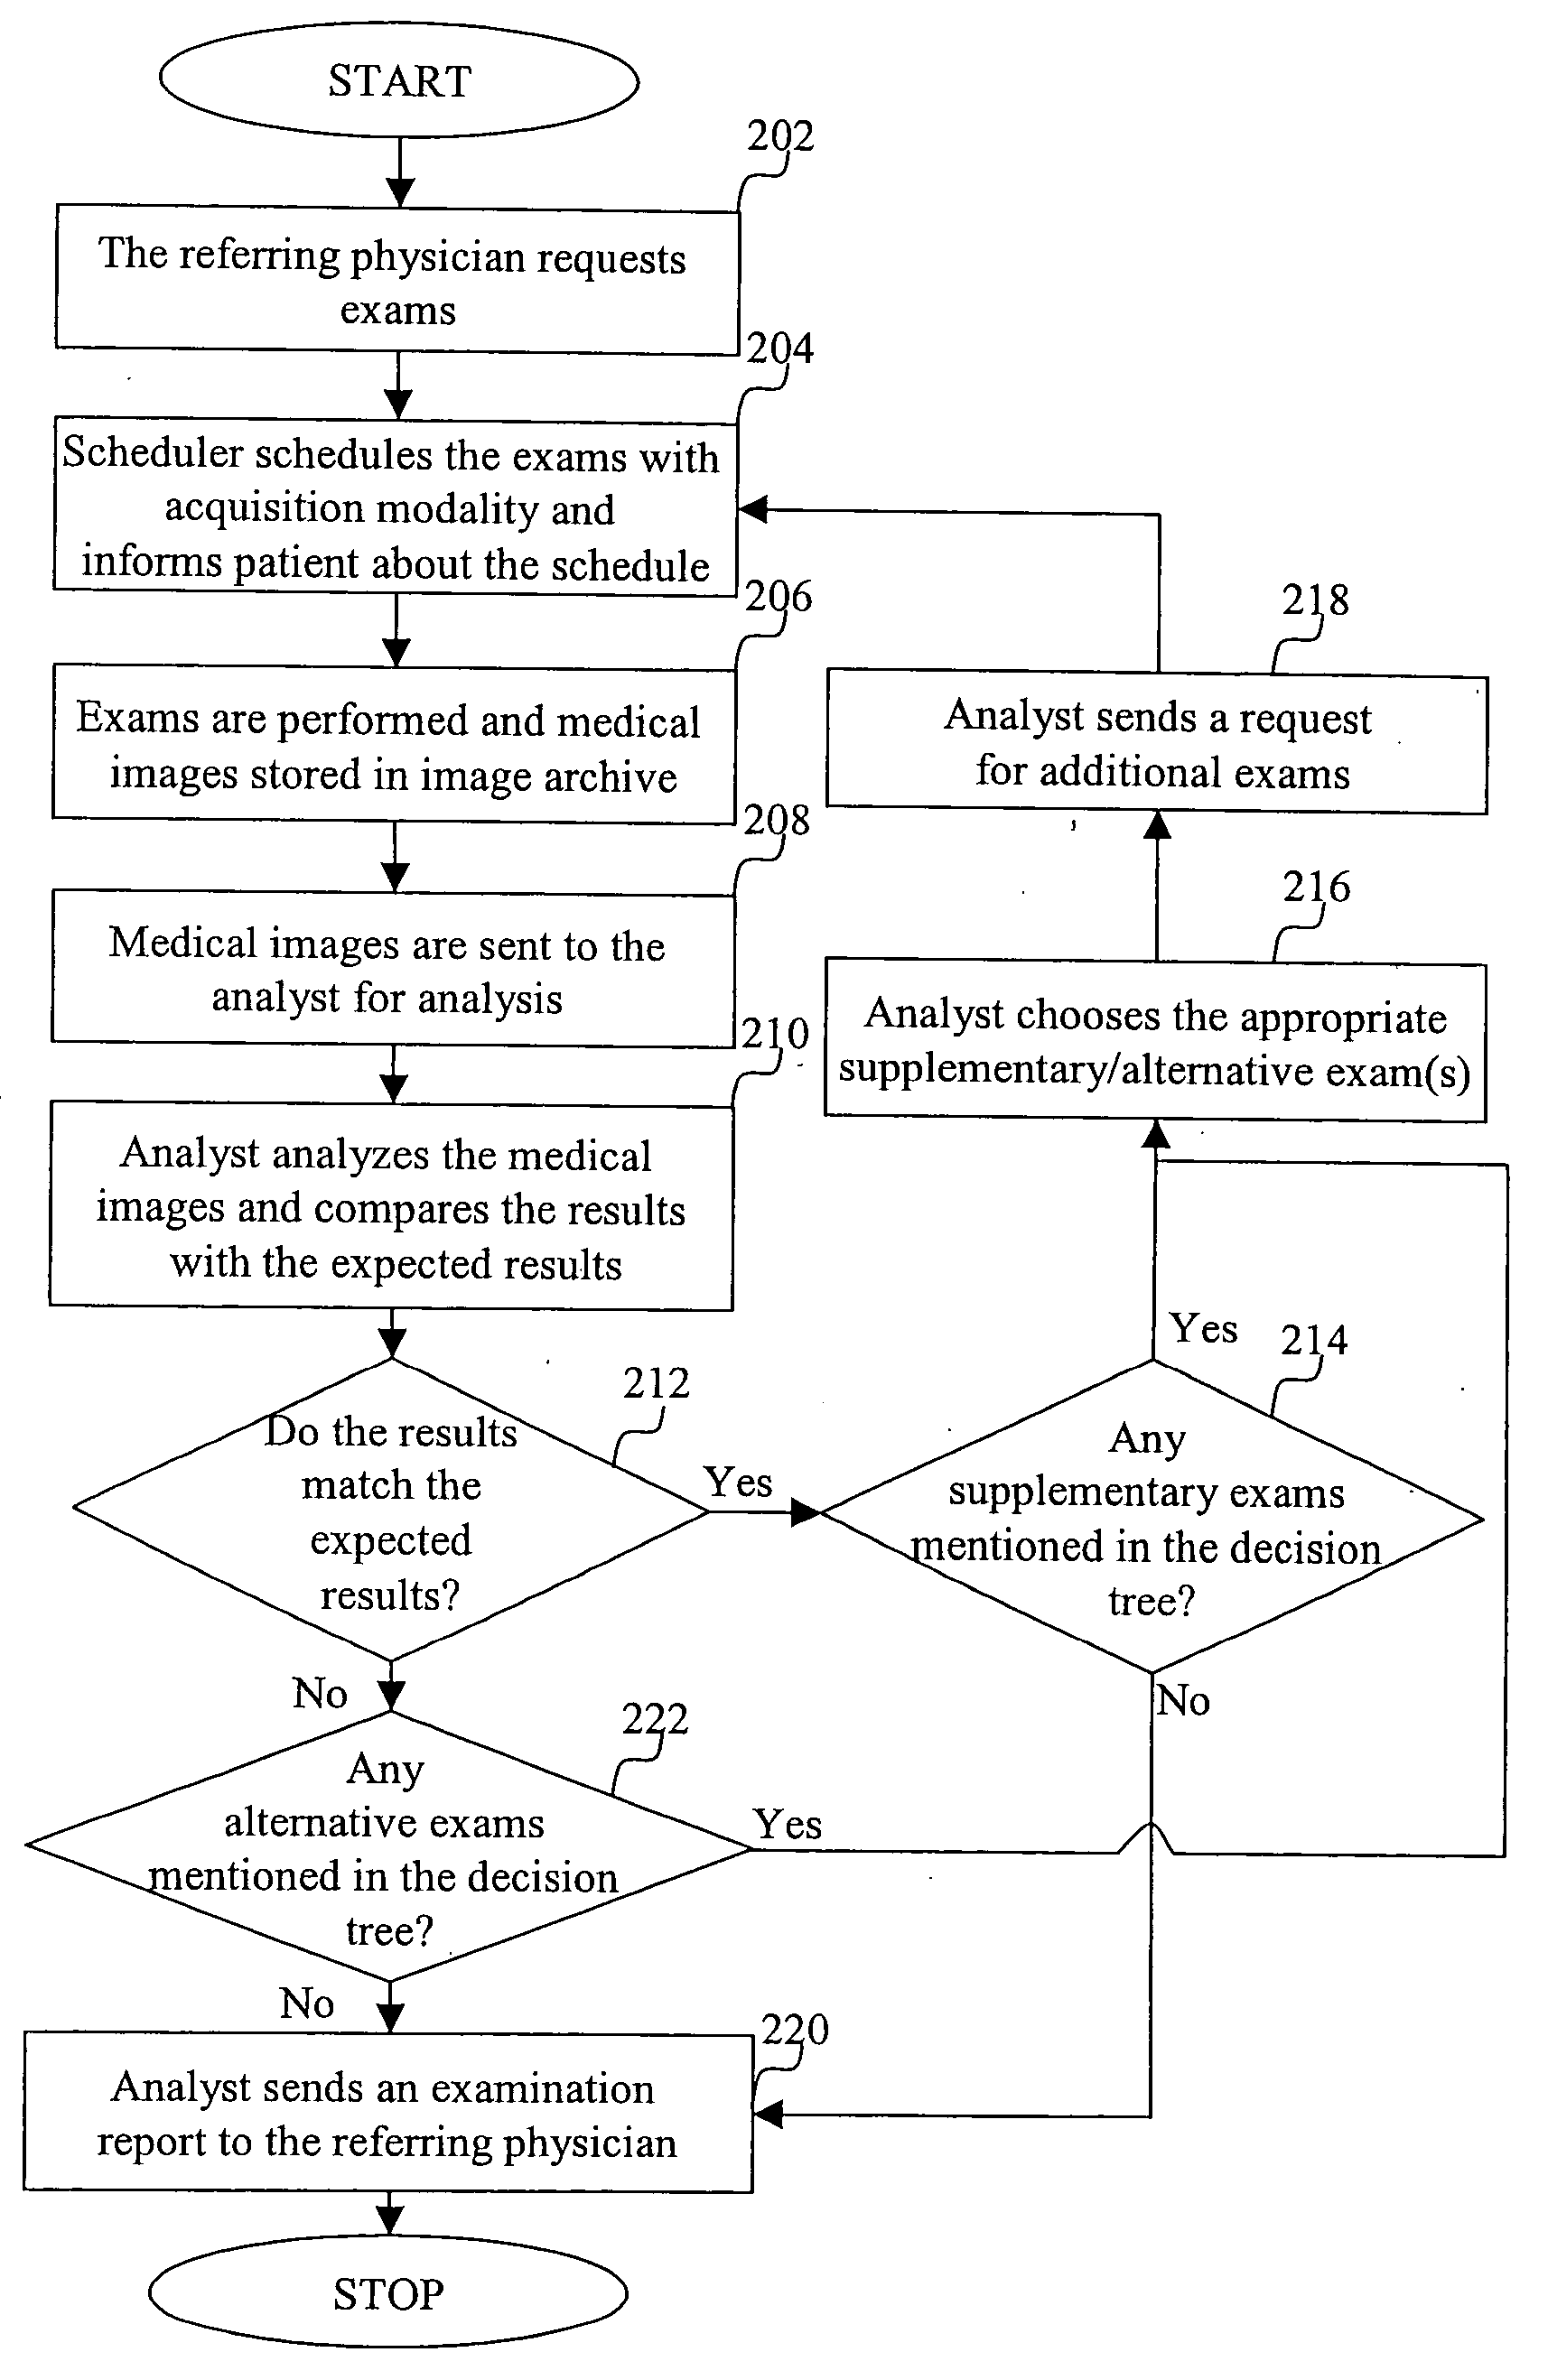 Method for processing a workflow for automated patient scheduling in a hospital information system